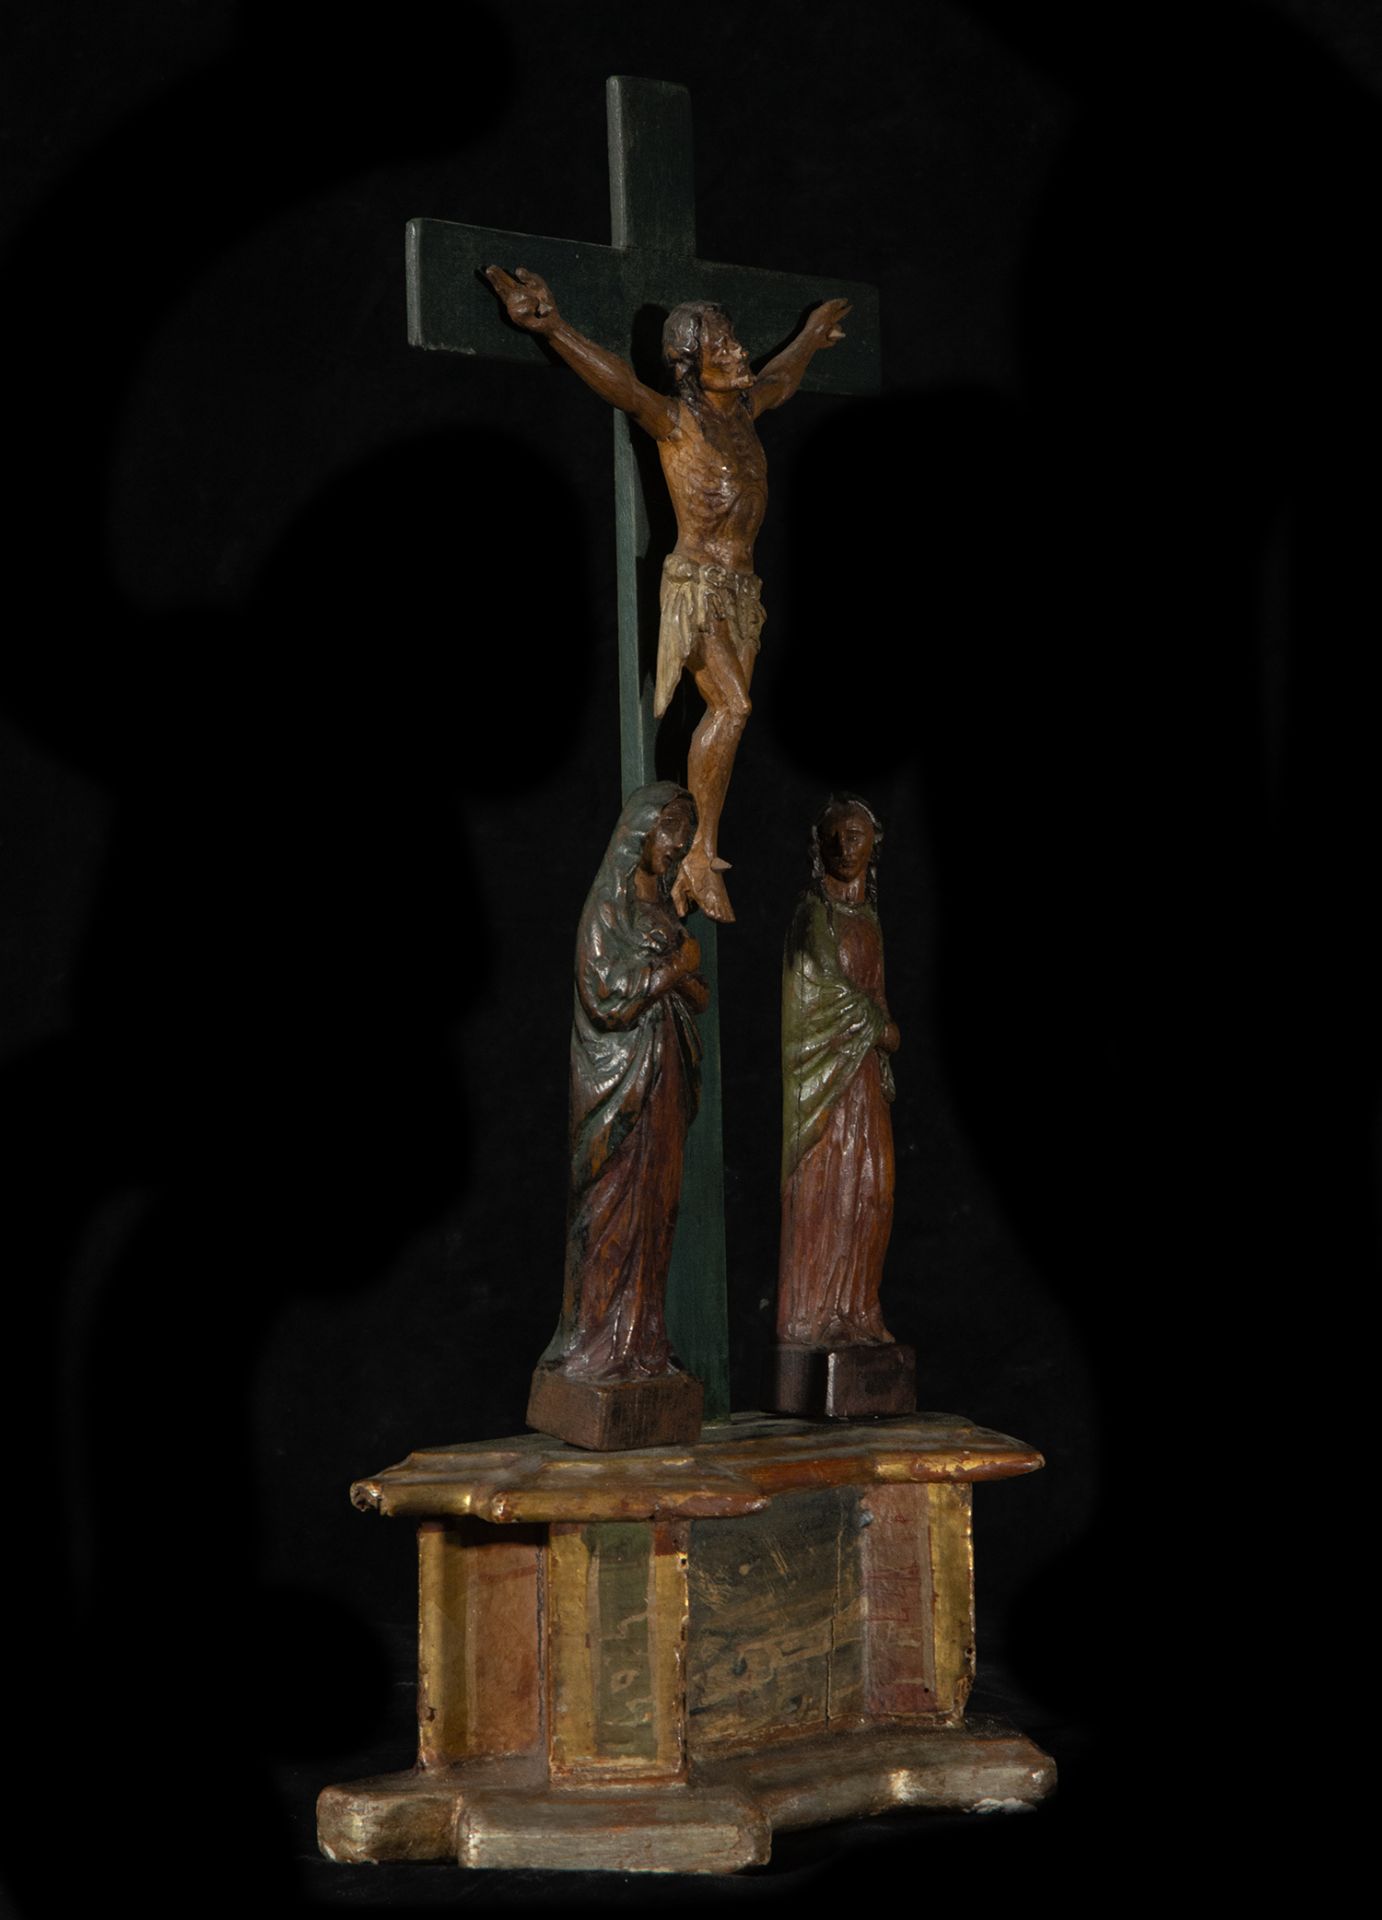 Portuguese colonial tabletop Calvary from the 16th - 17th centuries, Goa, in Teak wood - Image 5 of 6